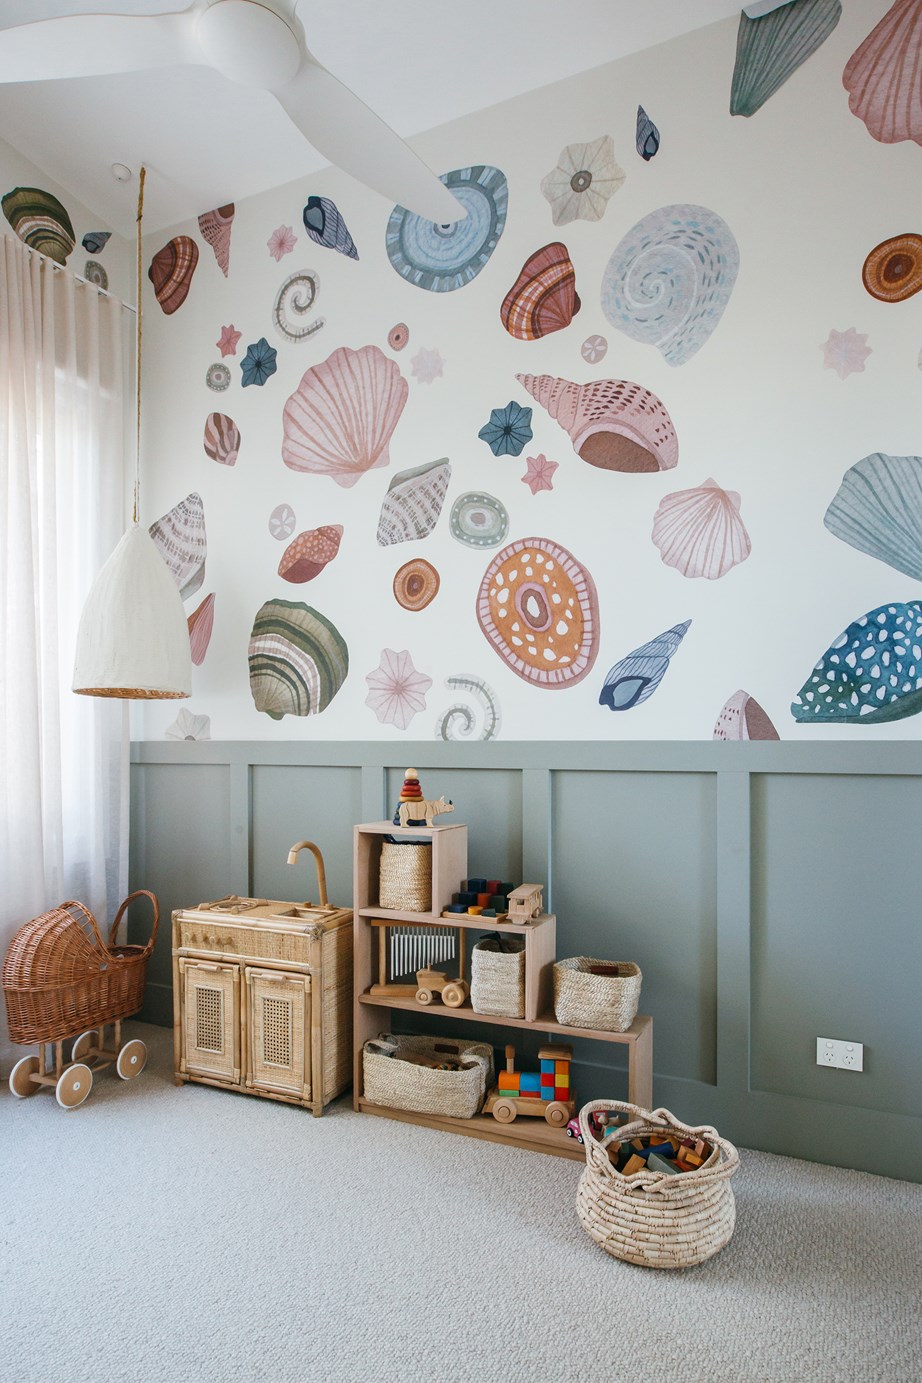 We can't get enough of these removable wall stickers by Farrah's Stone, available at [KK Homewares](https://www.kyalandkara.com/shop/seashell-wall-stickers/|target="_blank"|rel="nofollow")! Use as many or as little stickers as you like and turn a blank wall into a work of art by simply sticking the shells where you like on the wall.